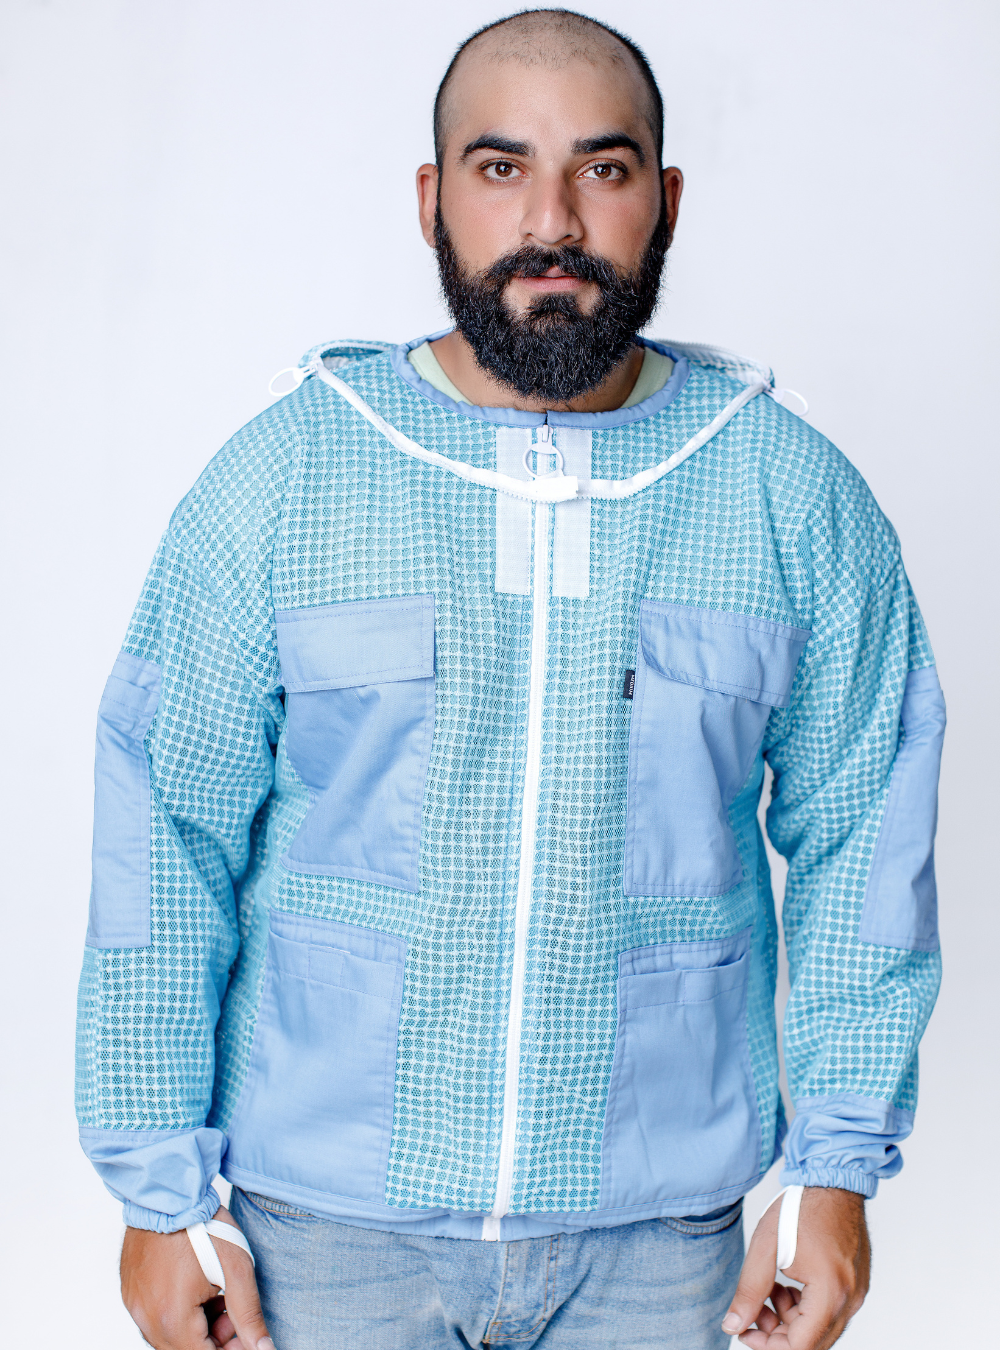 Aqua blue beekeeper jacket with a distinctive mesh pattern and reinforced pocket areas and detachable veil.